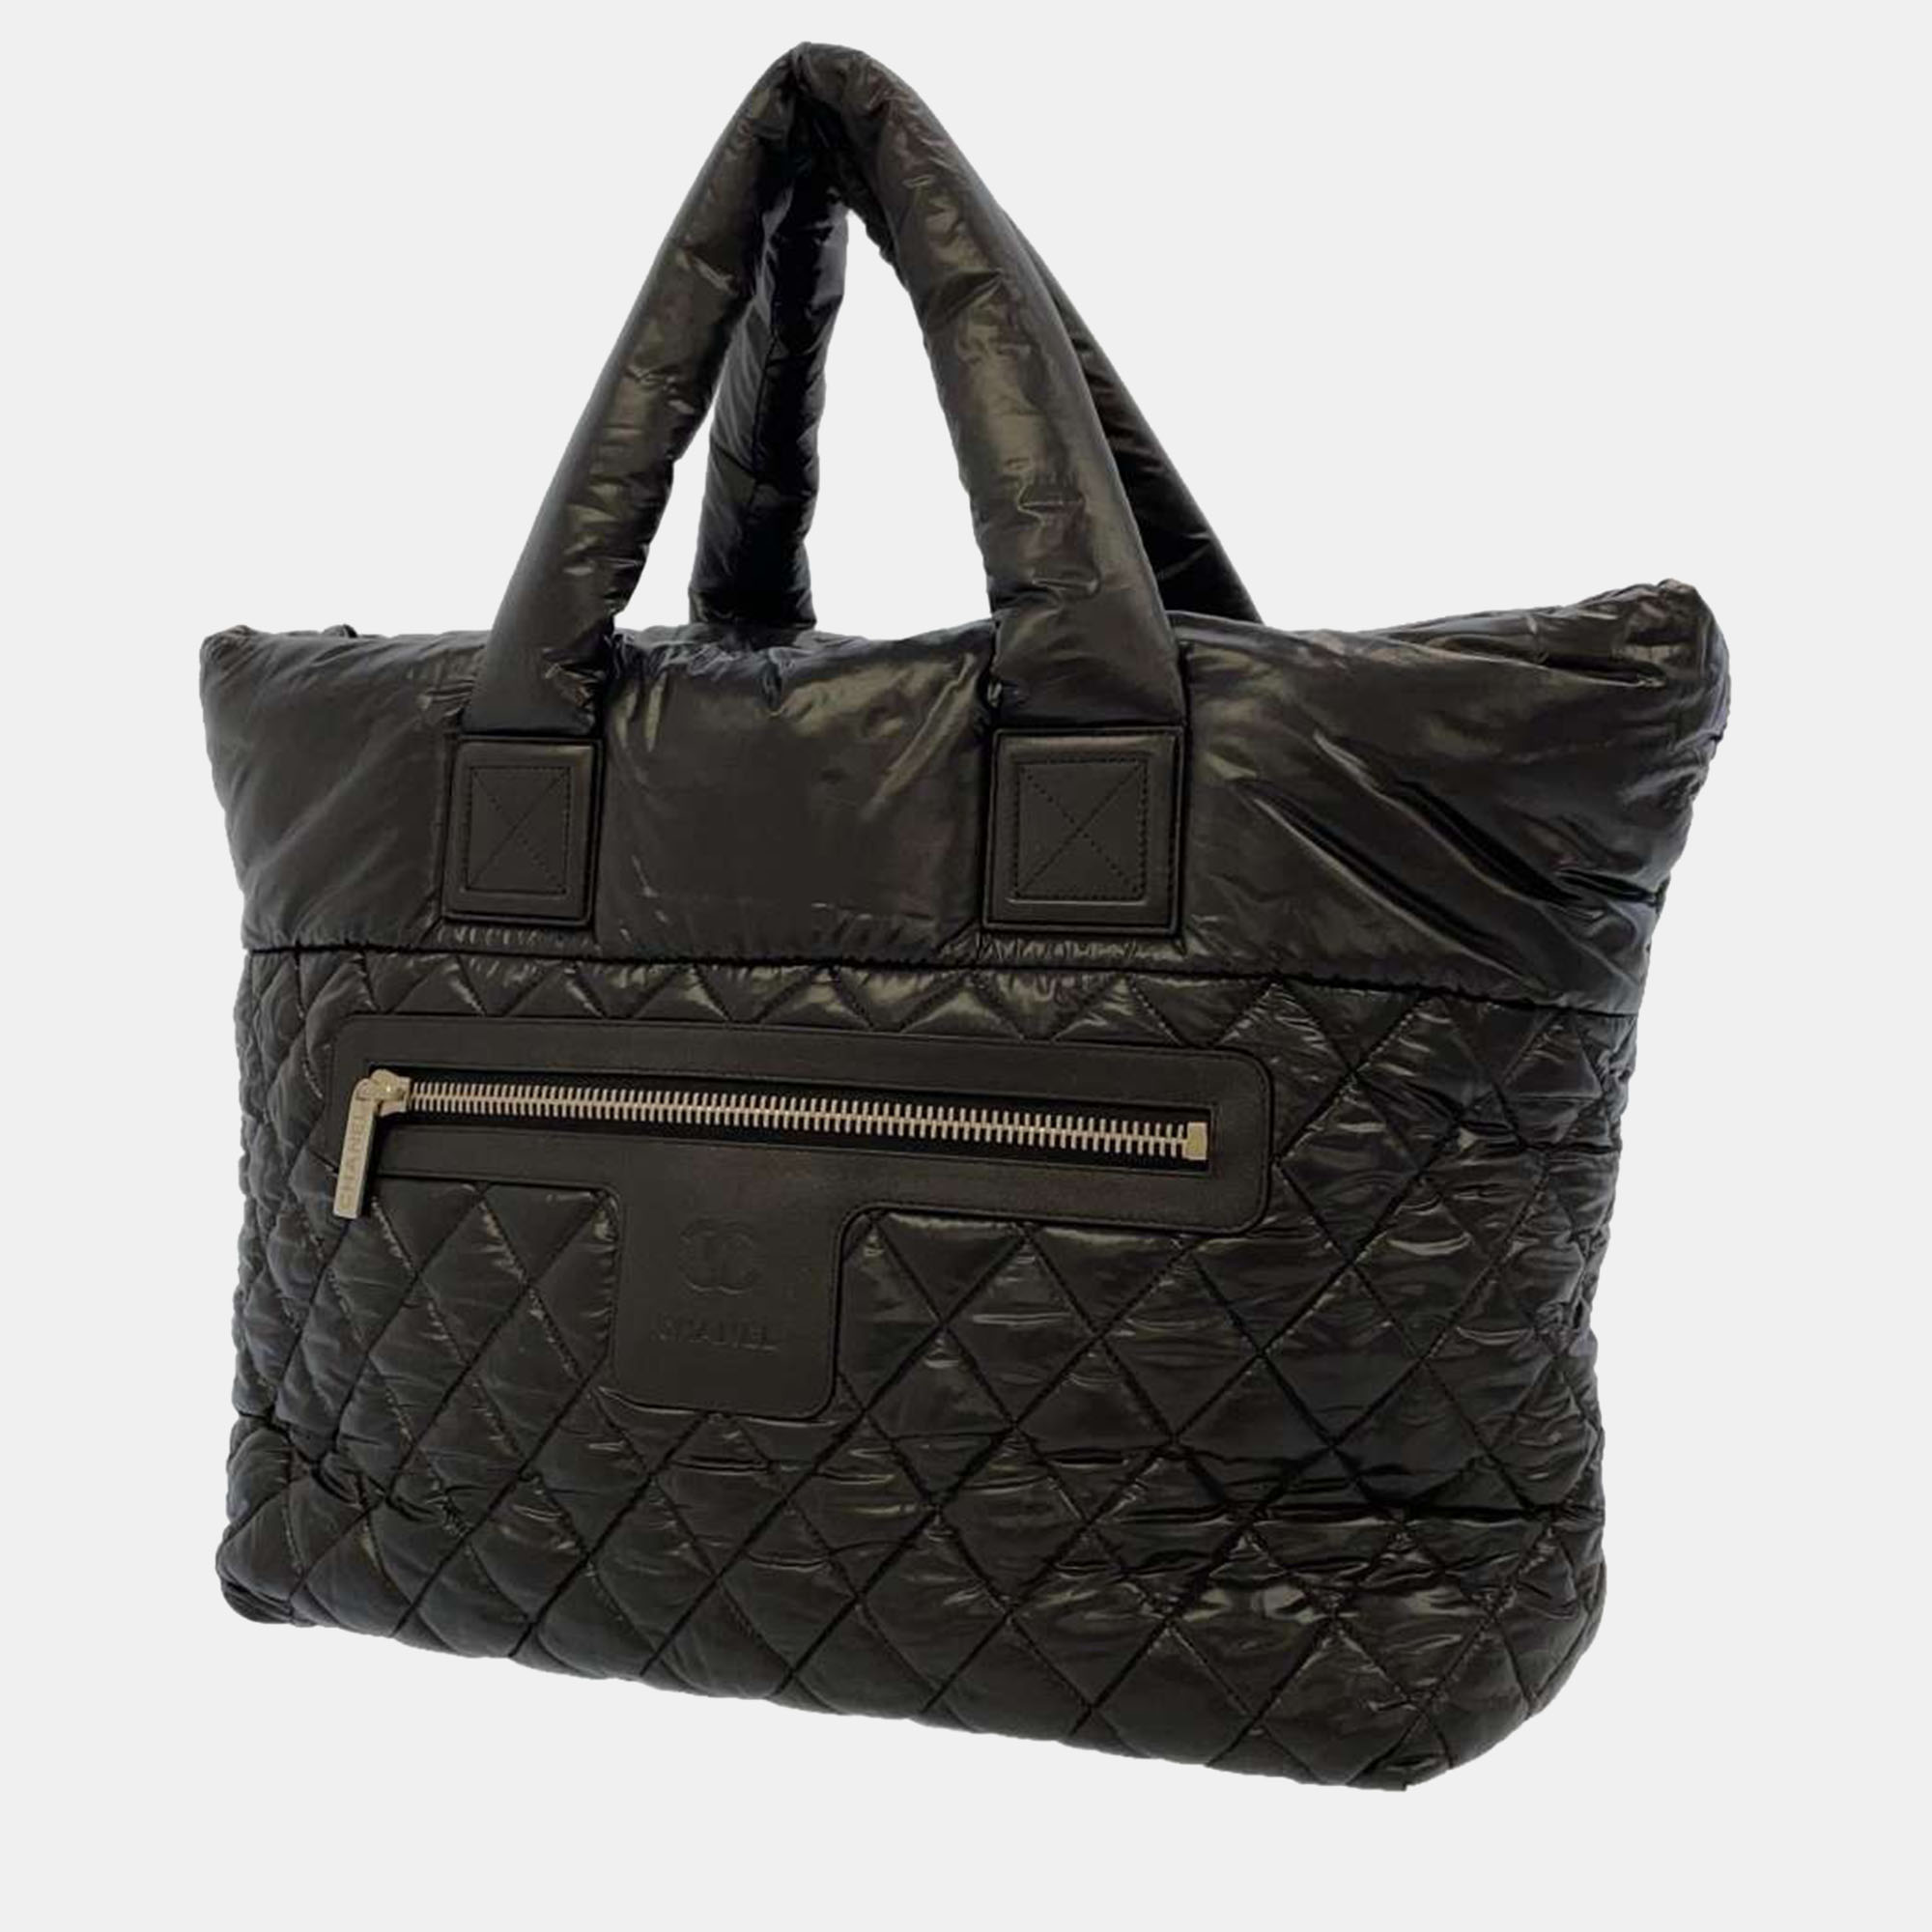 CHANEL, Bags, Pre Loved Chanel Coco Cocoon Tote Bag Black